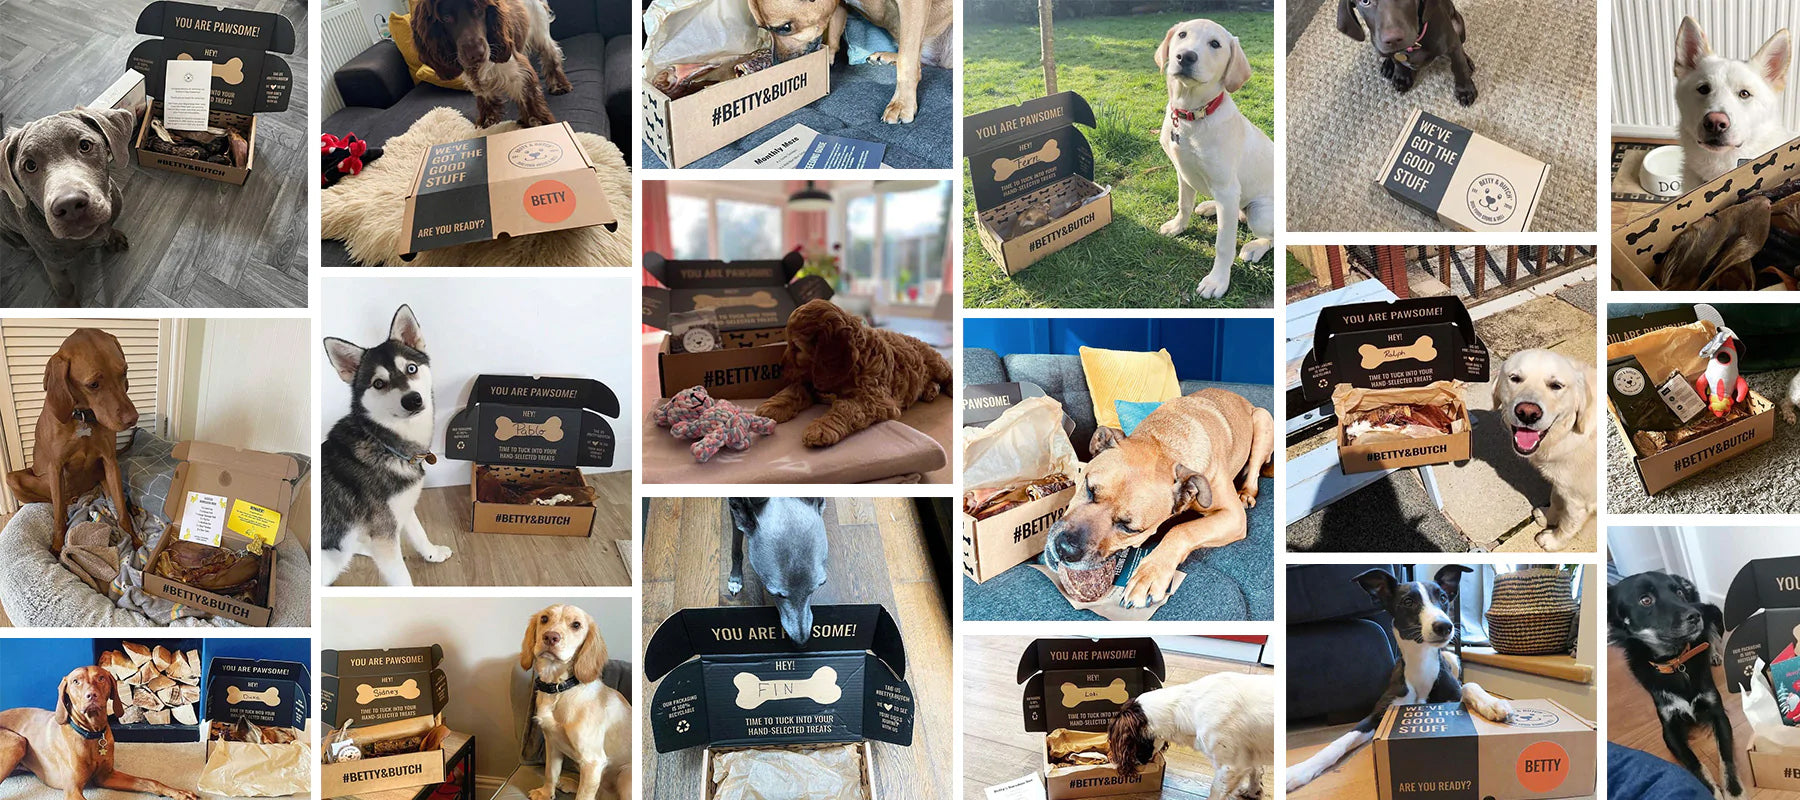 https://cdn.shopify.com/s/files/1/0894/7020/files/Betty-And-Butch-Dog-Treat-Boxes-Which-One-Should-I-Get-For-My-Dog_2048x2048.jpg?v=1656490181